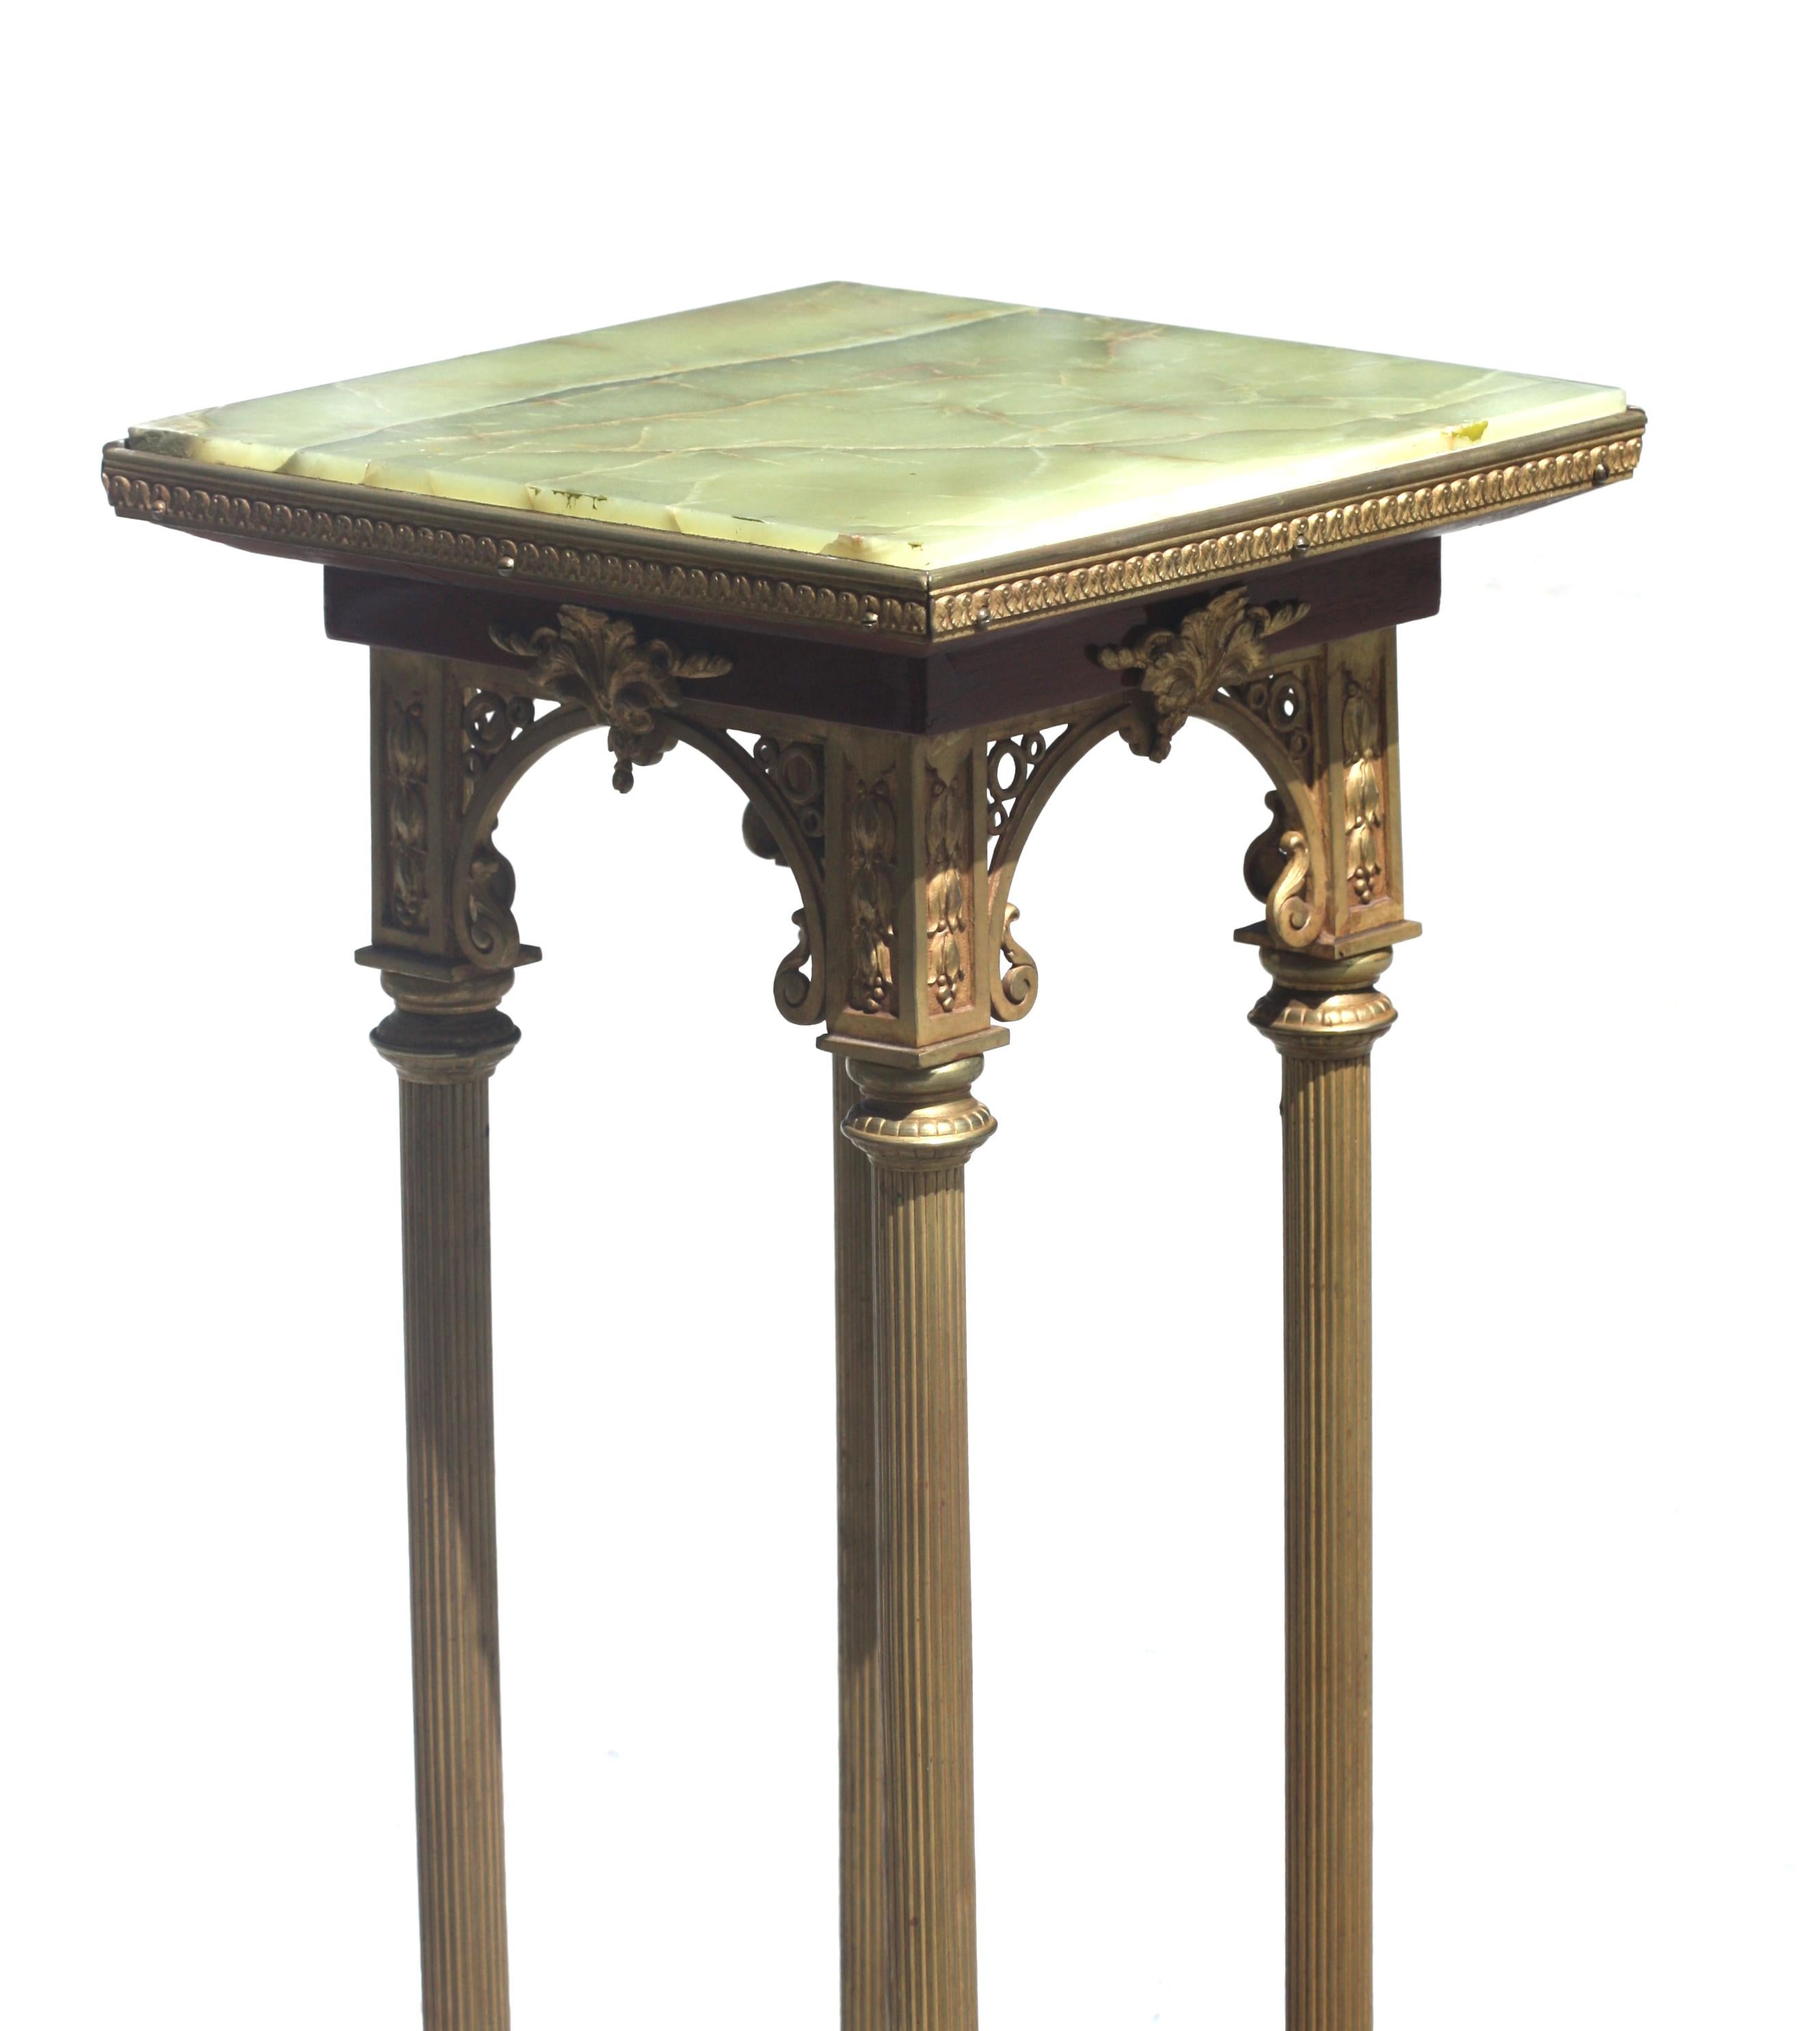 
Continental Onyx and Gilt-Bronze Pedestal
The square onyx top on four reeded columnar legs, above a mahogany platform, on bronze paw feet.
Height 30.5 in. (77.47 cm.), Width square 12 in. (30.48 cm.)